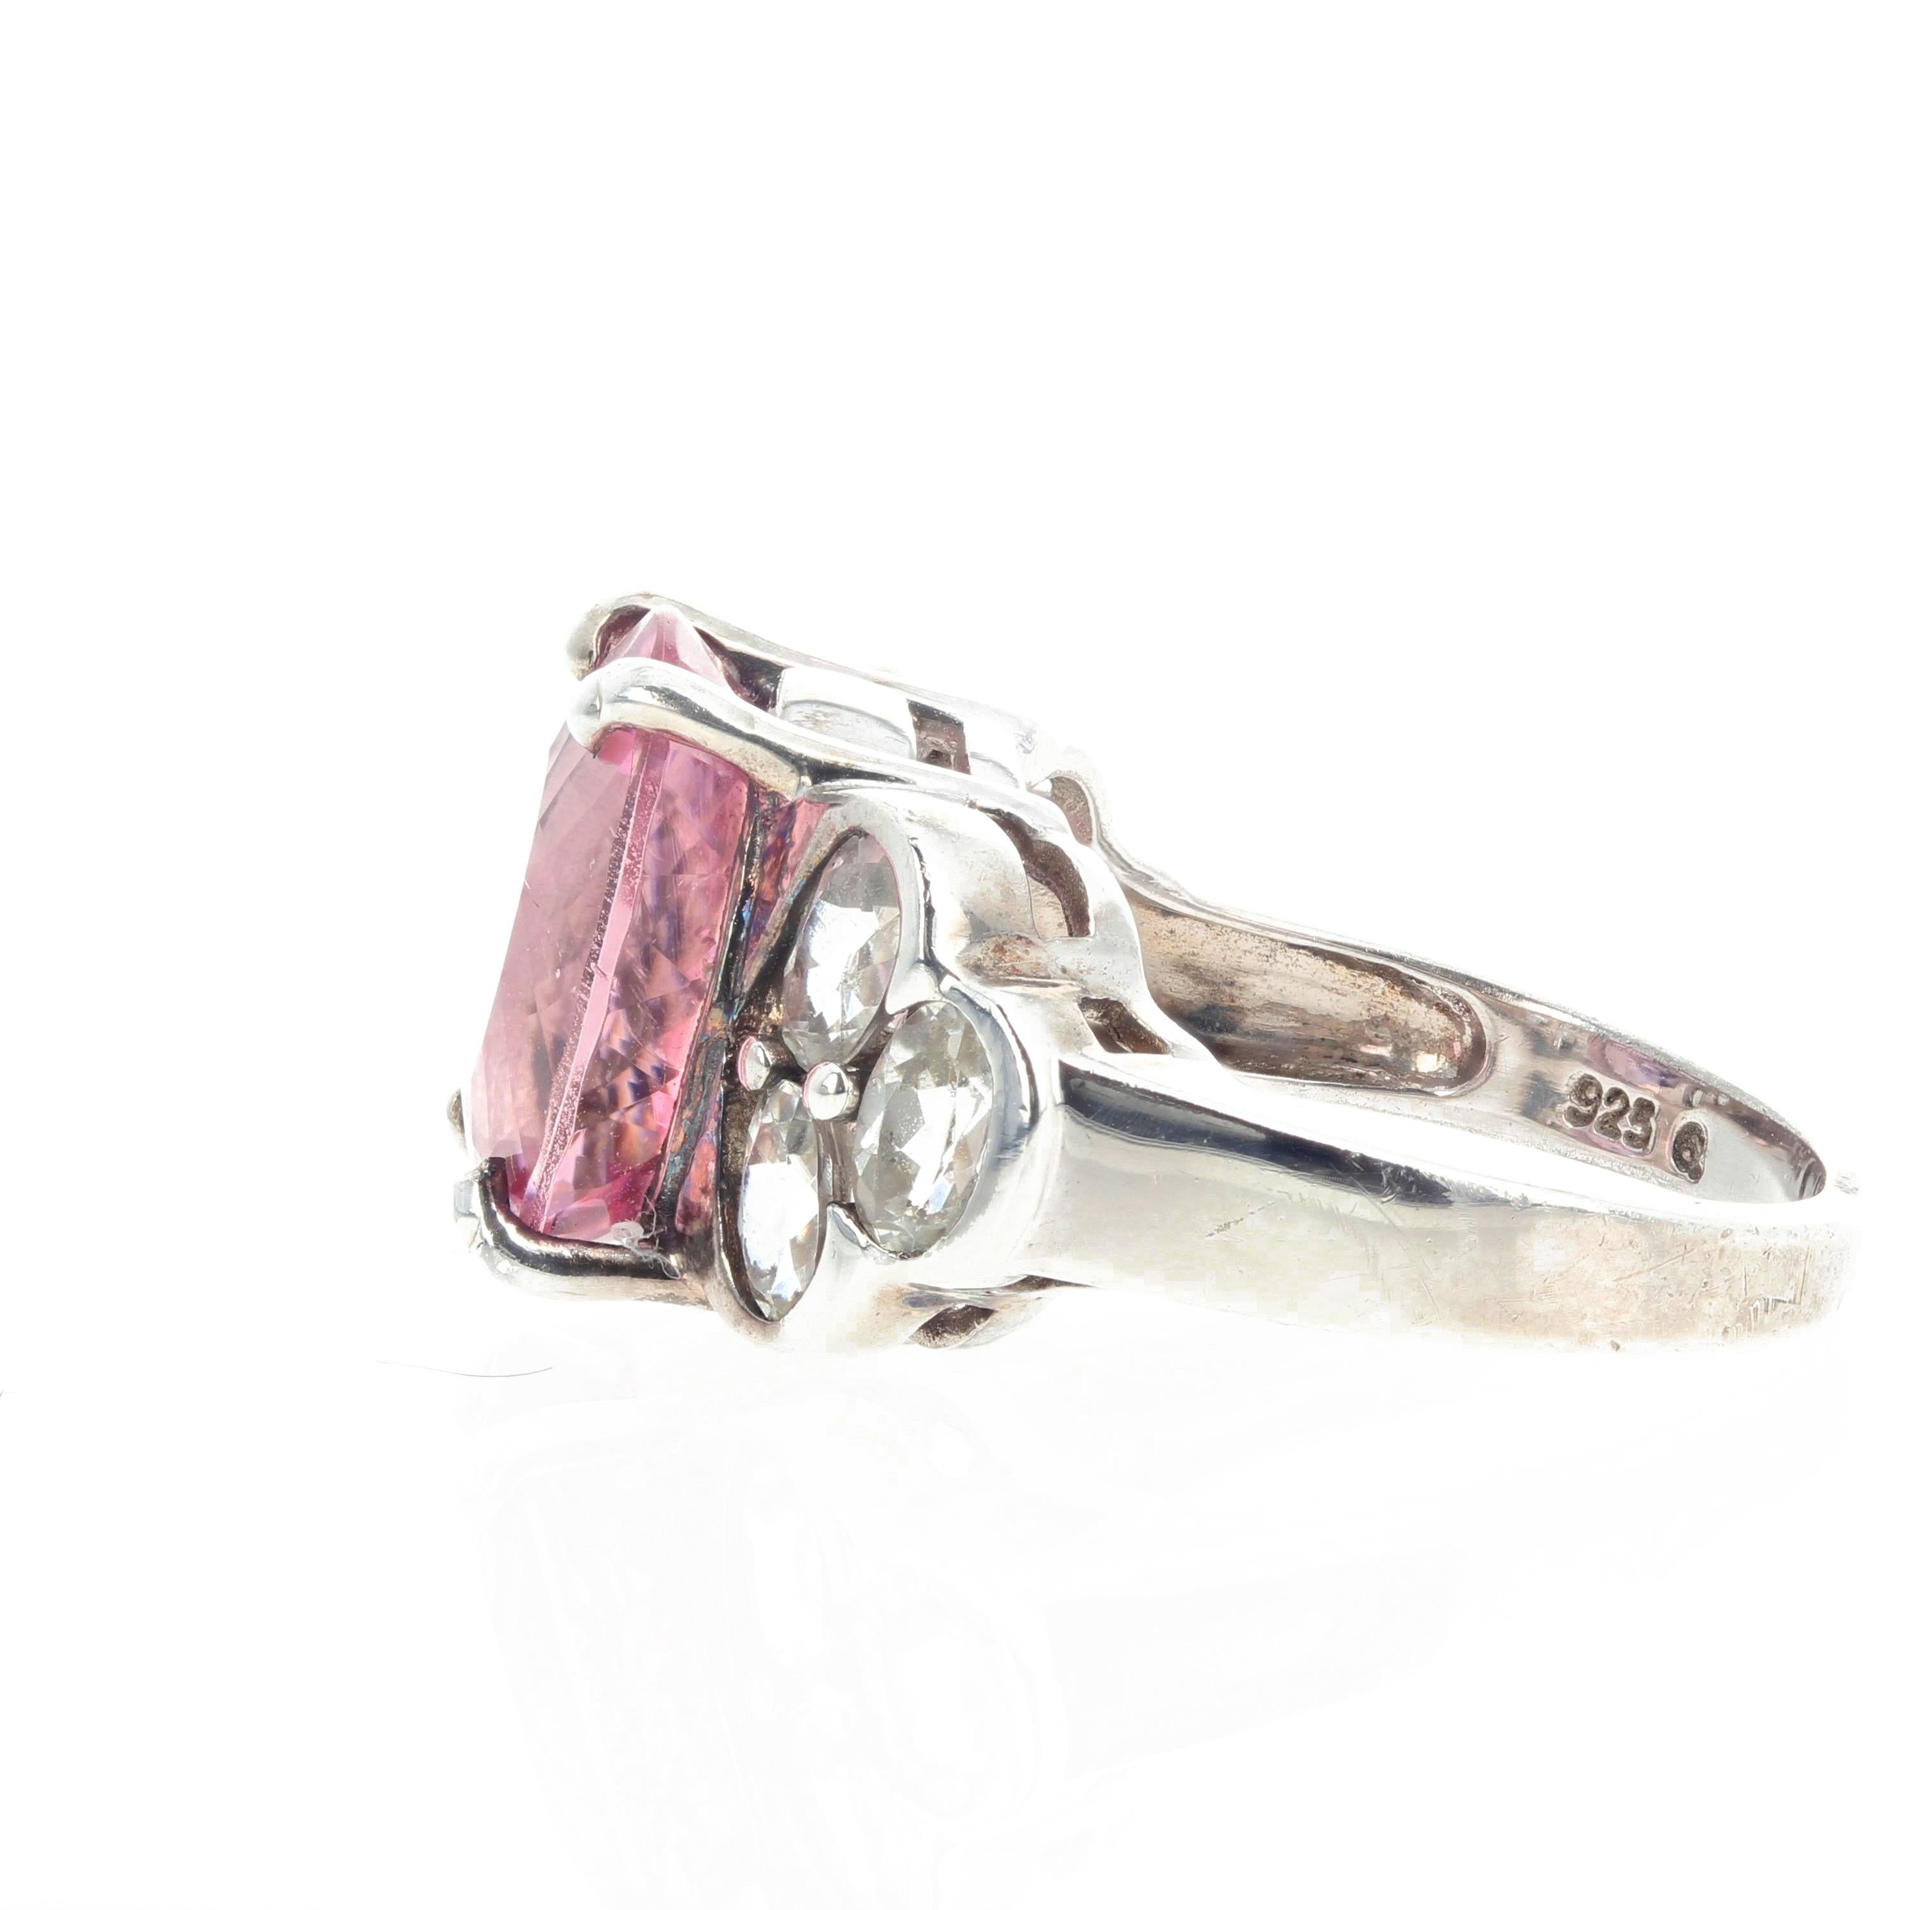 AJD Beautiful 4 Cts Sparkling Pink Tourmaline & Silver Quartz Silver Ring In New Condition For Sale In Raleigh, NC